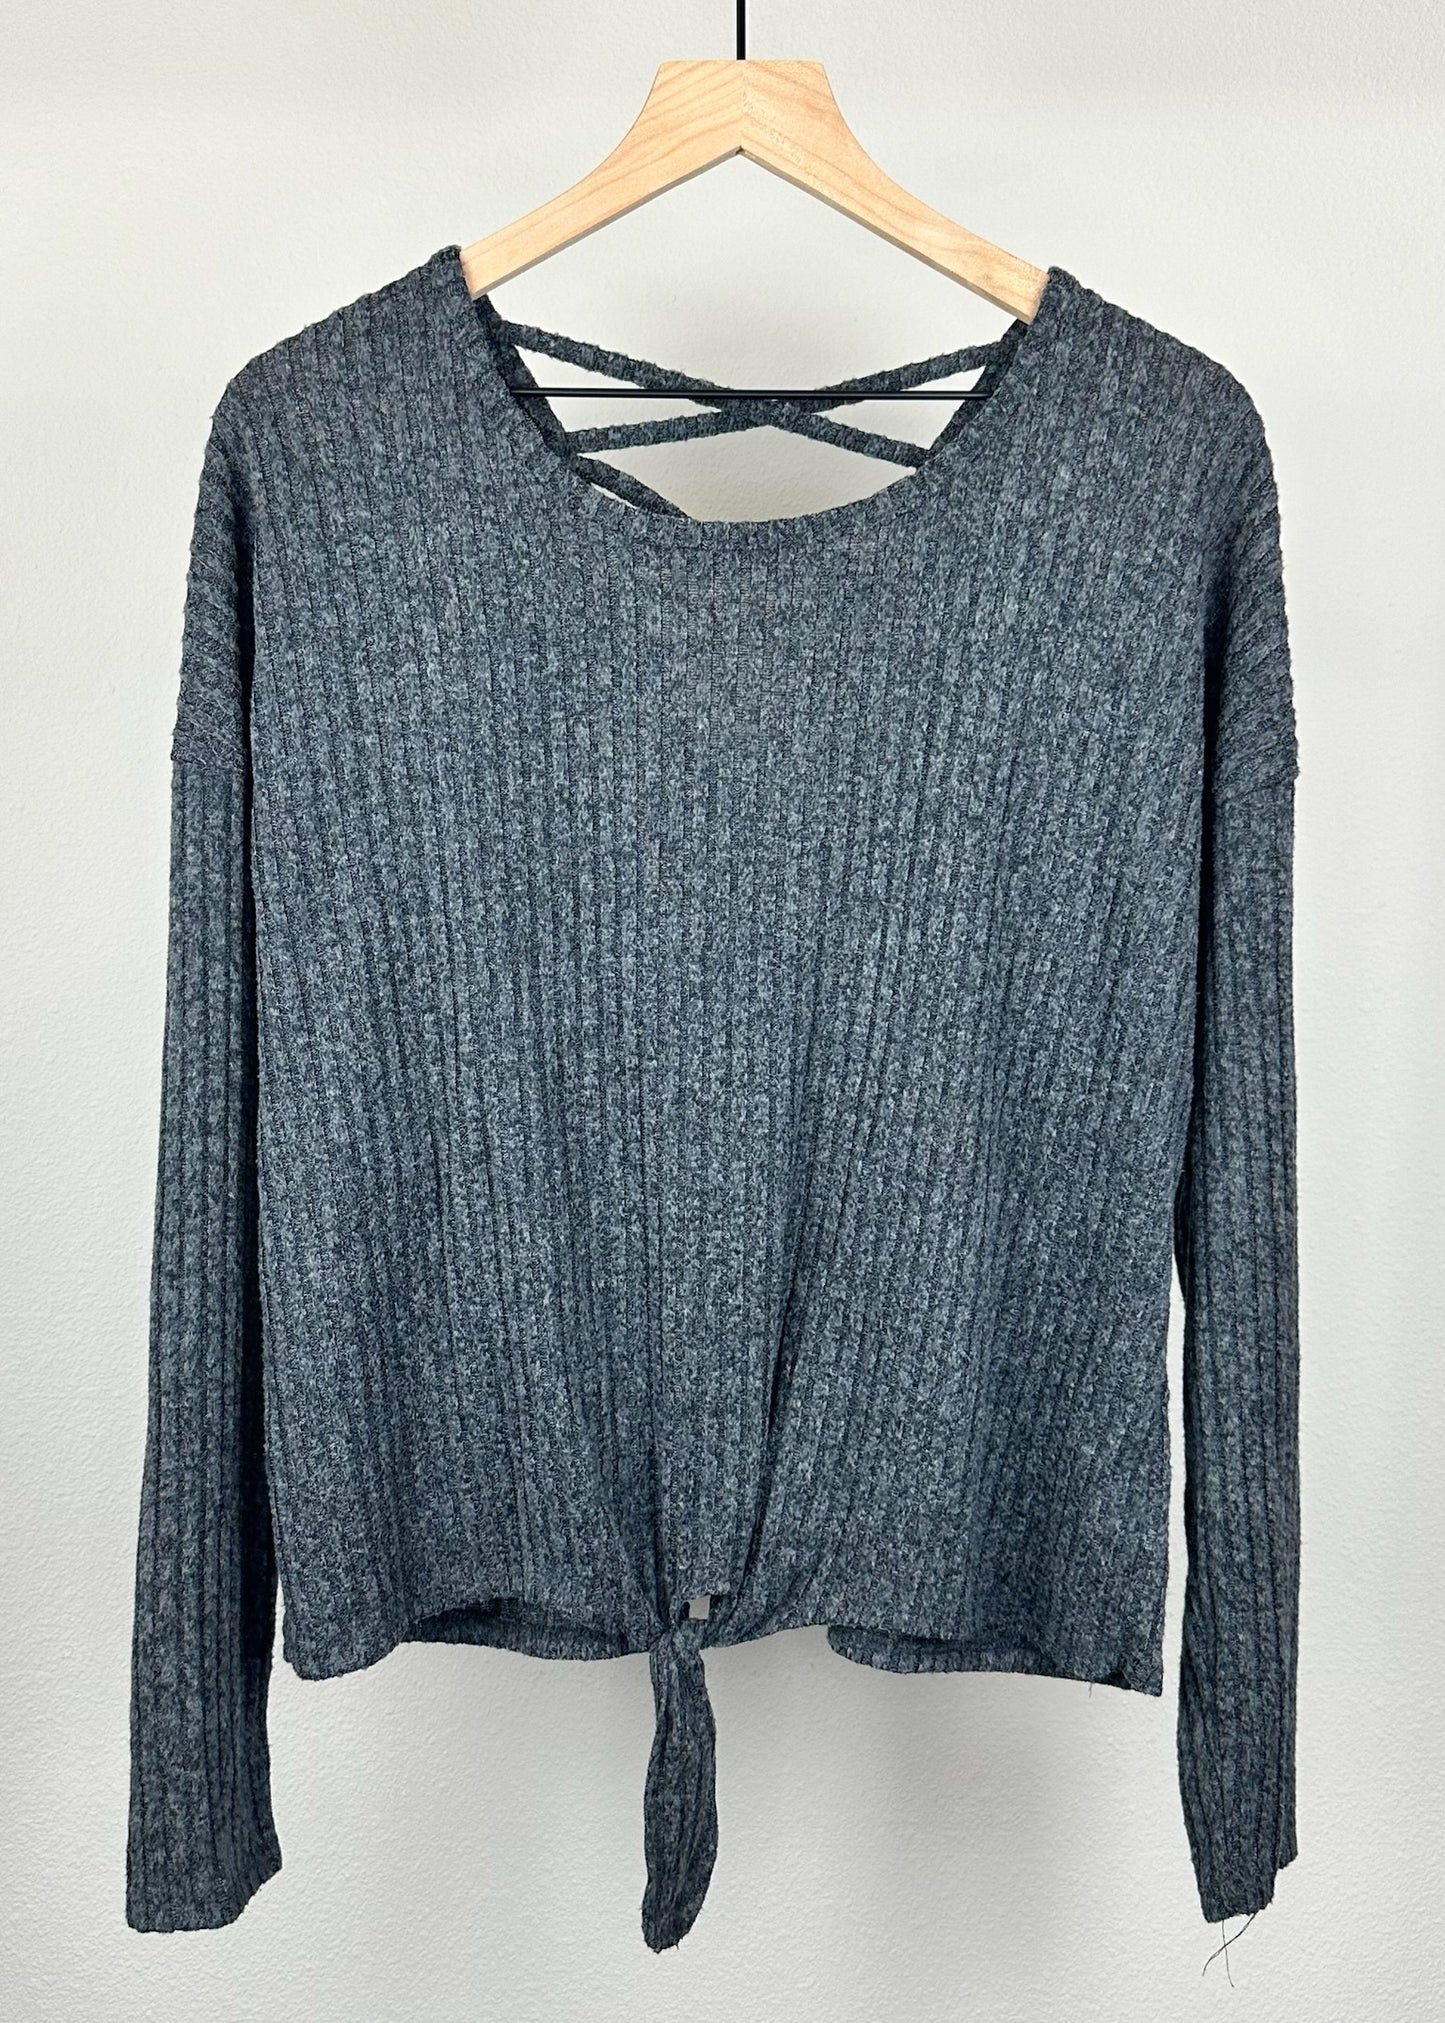 Grey Sweater by No Boundaries